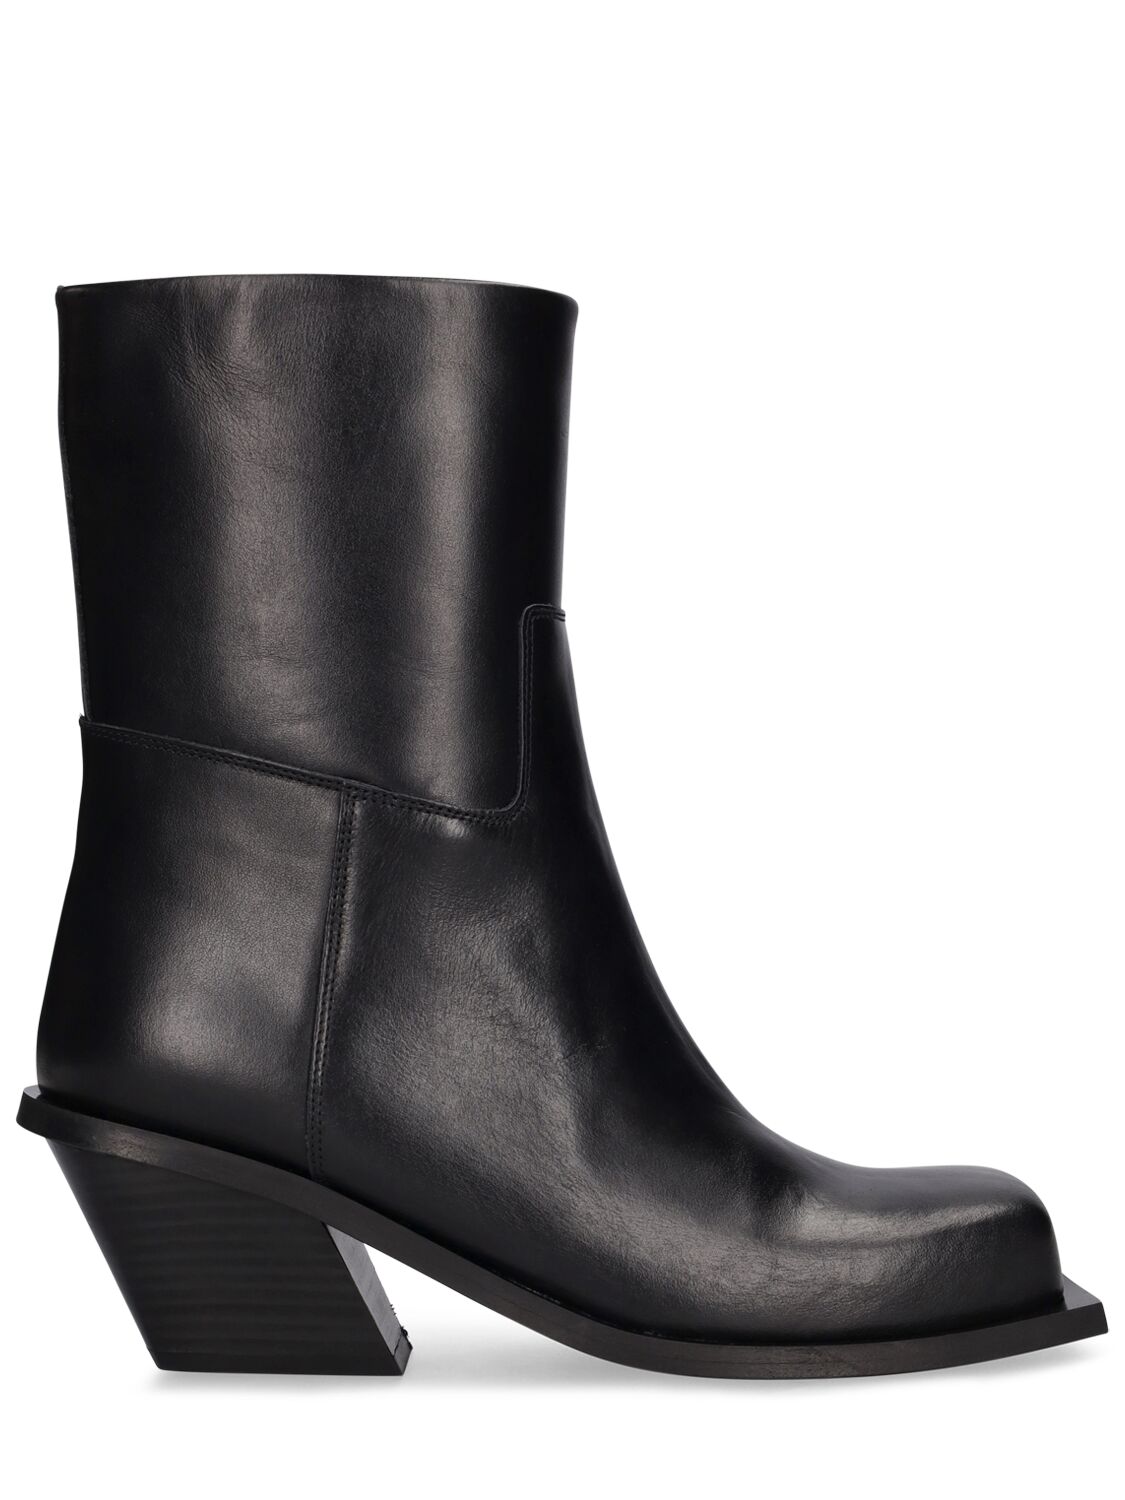 Gia Borghini 60mm Blondine Leather Ankle Boots In Black